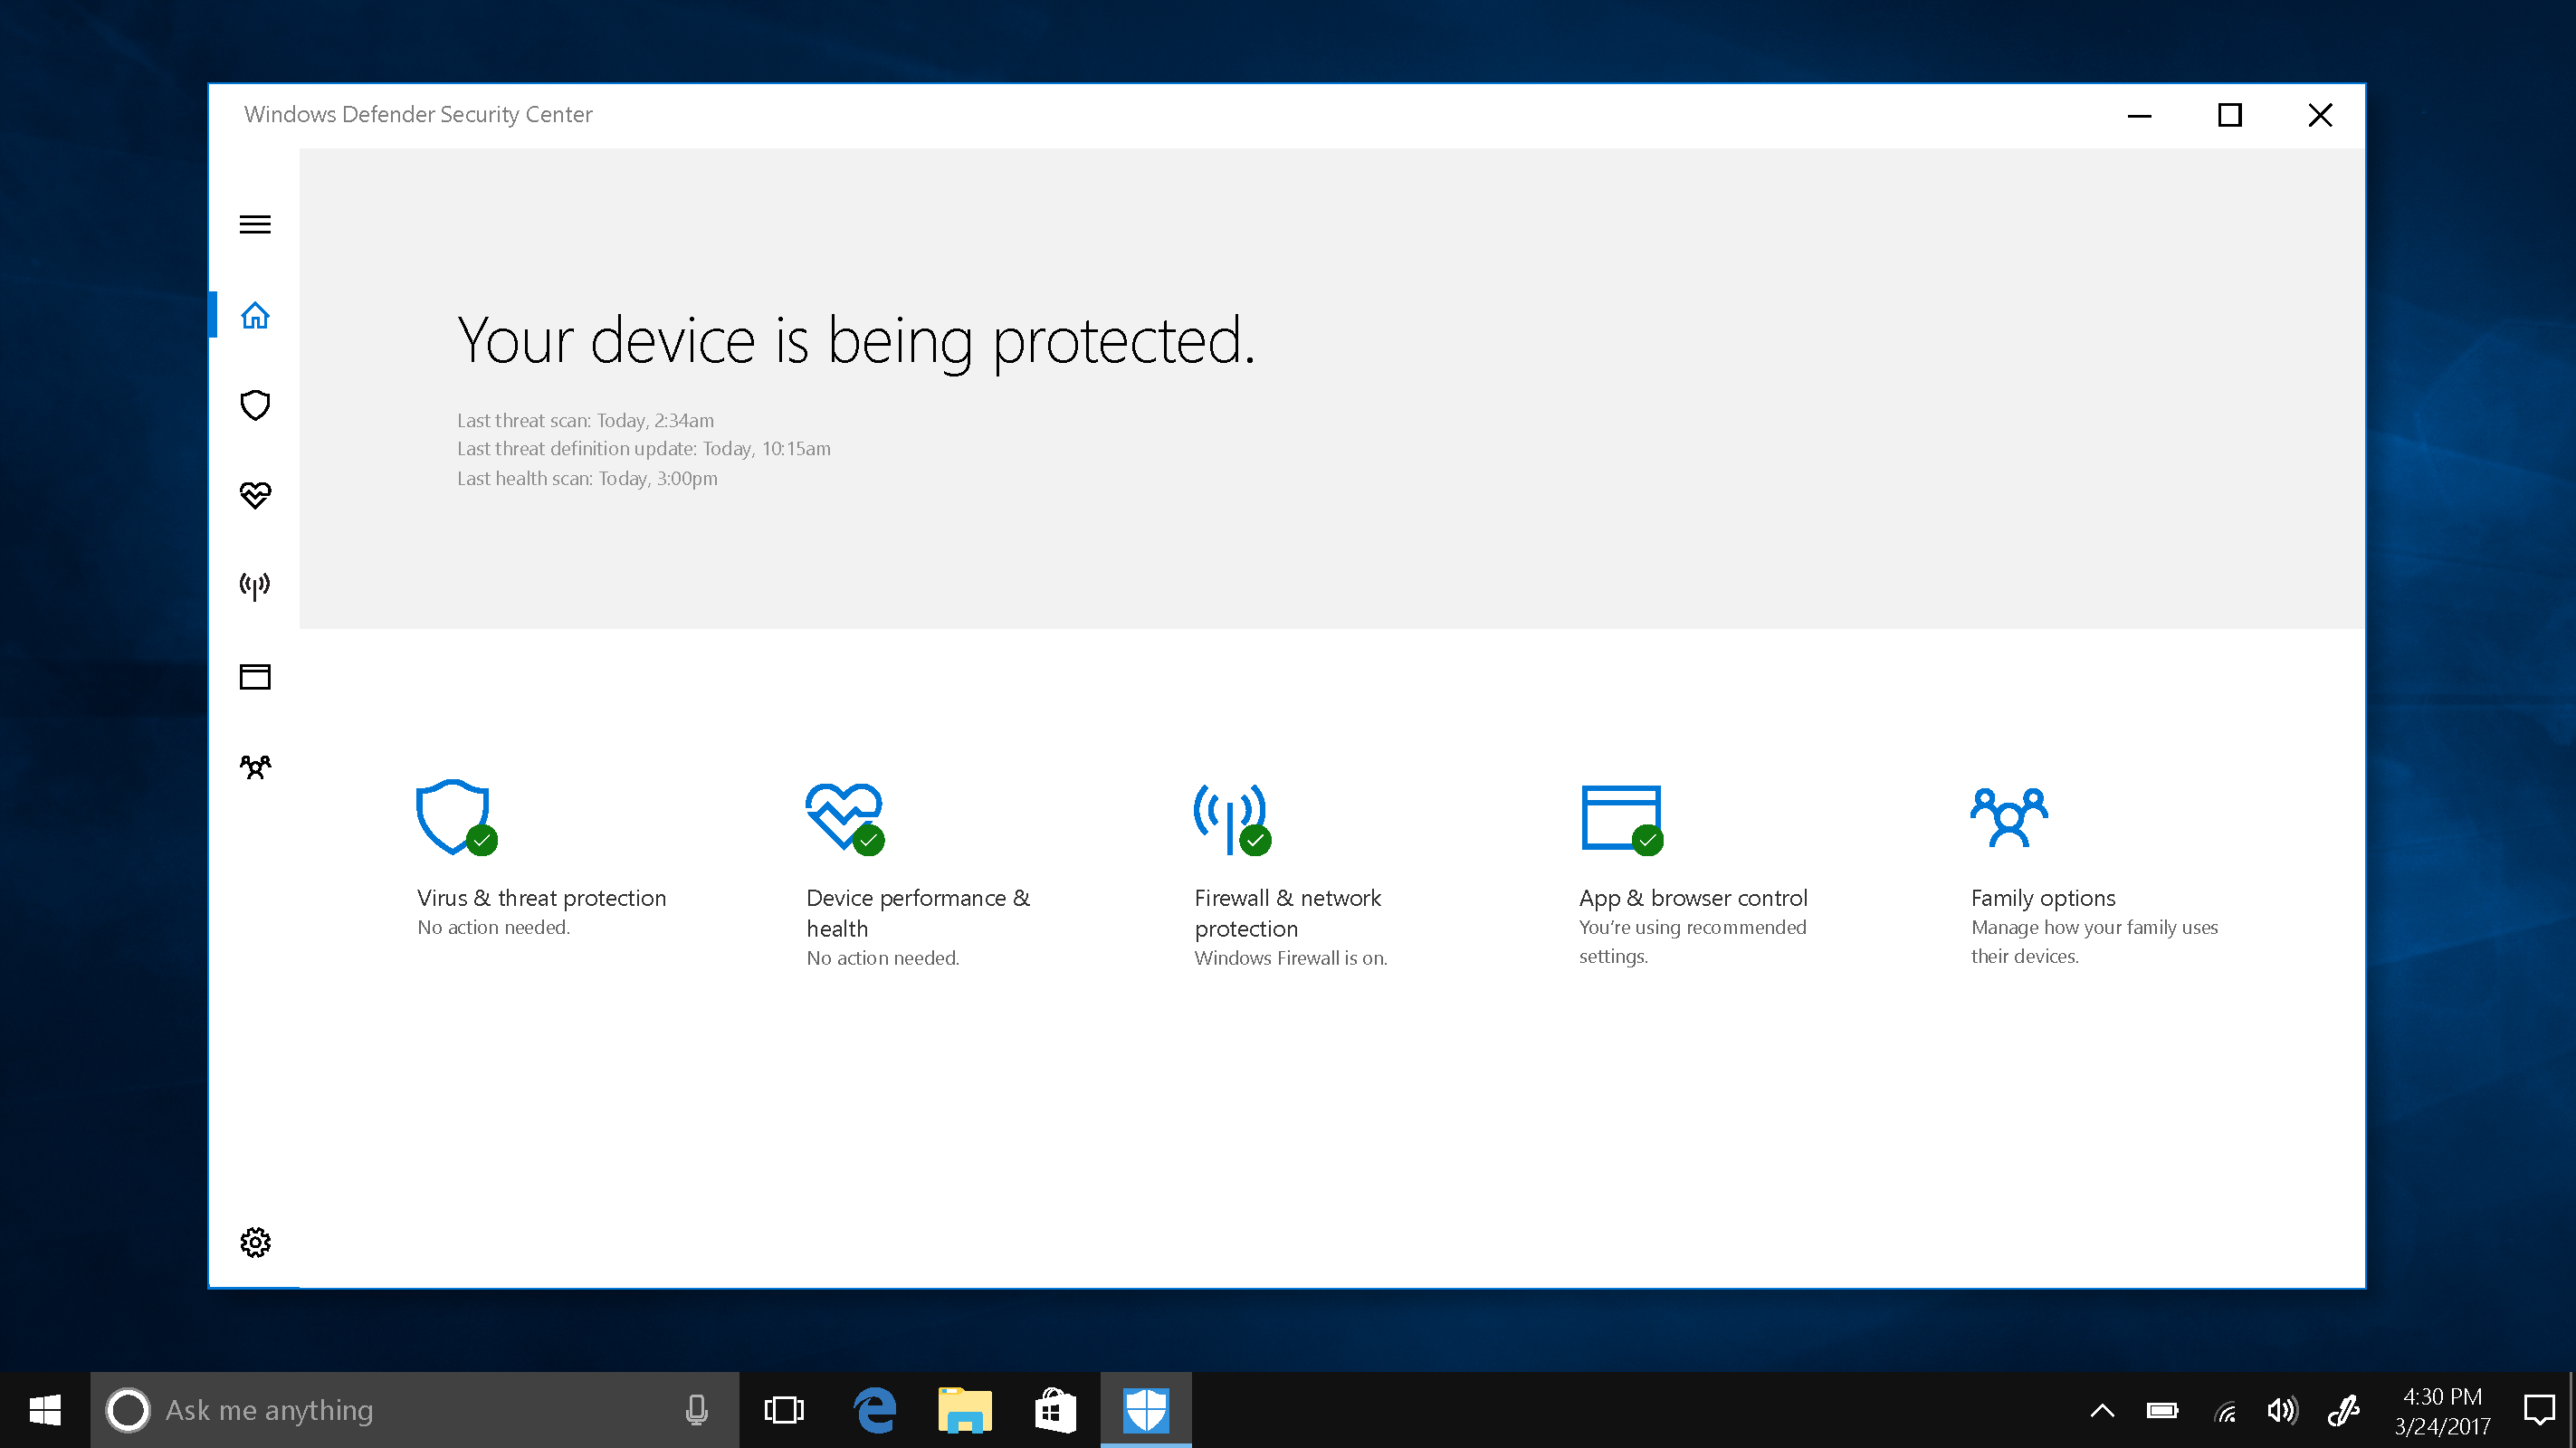 The new Windows Defender Security Center dashboard coming with the Windows 10 Creators Update gives you visibility of your device security, health, and online safety.